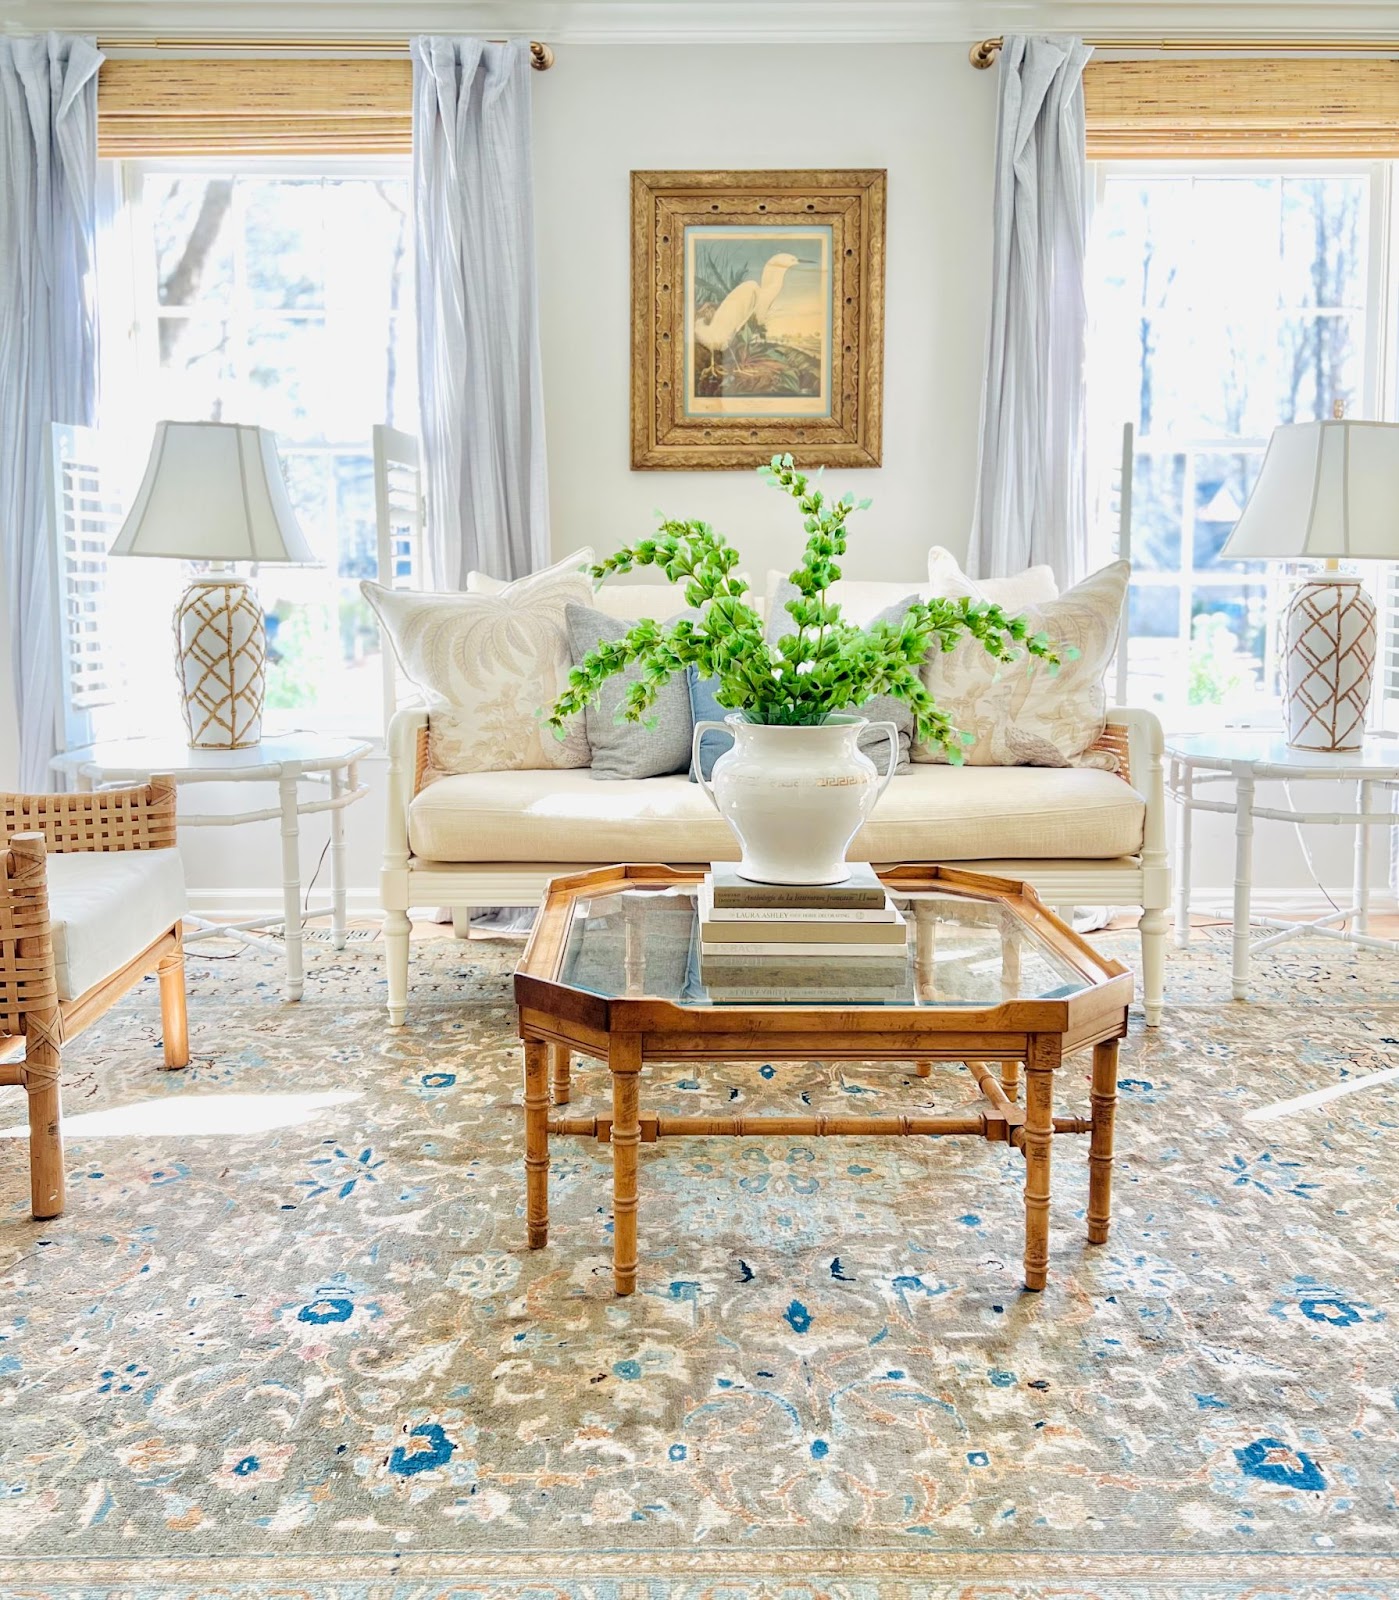 Sally's living room emanates a serene ambiance with its dominant white-beige color scheme, accented by touches of light brown on the coffee table, rattan armchairs, wall painting frame, area rug, and roller blinds.